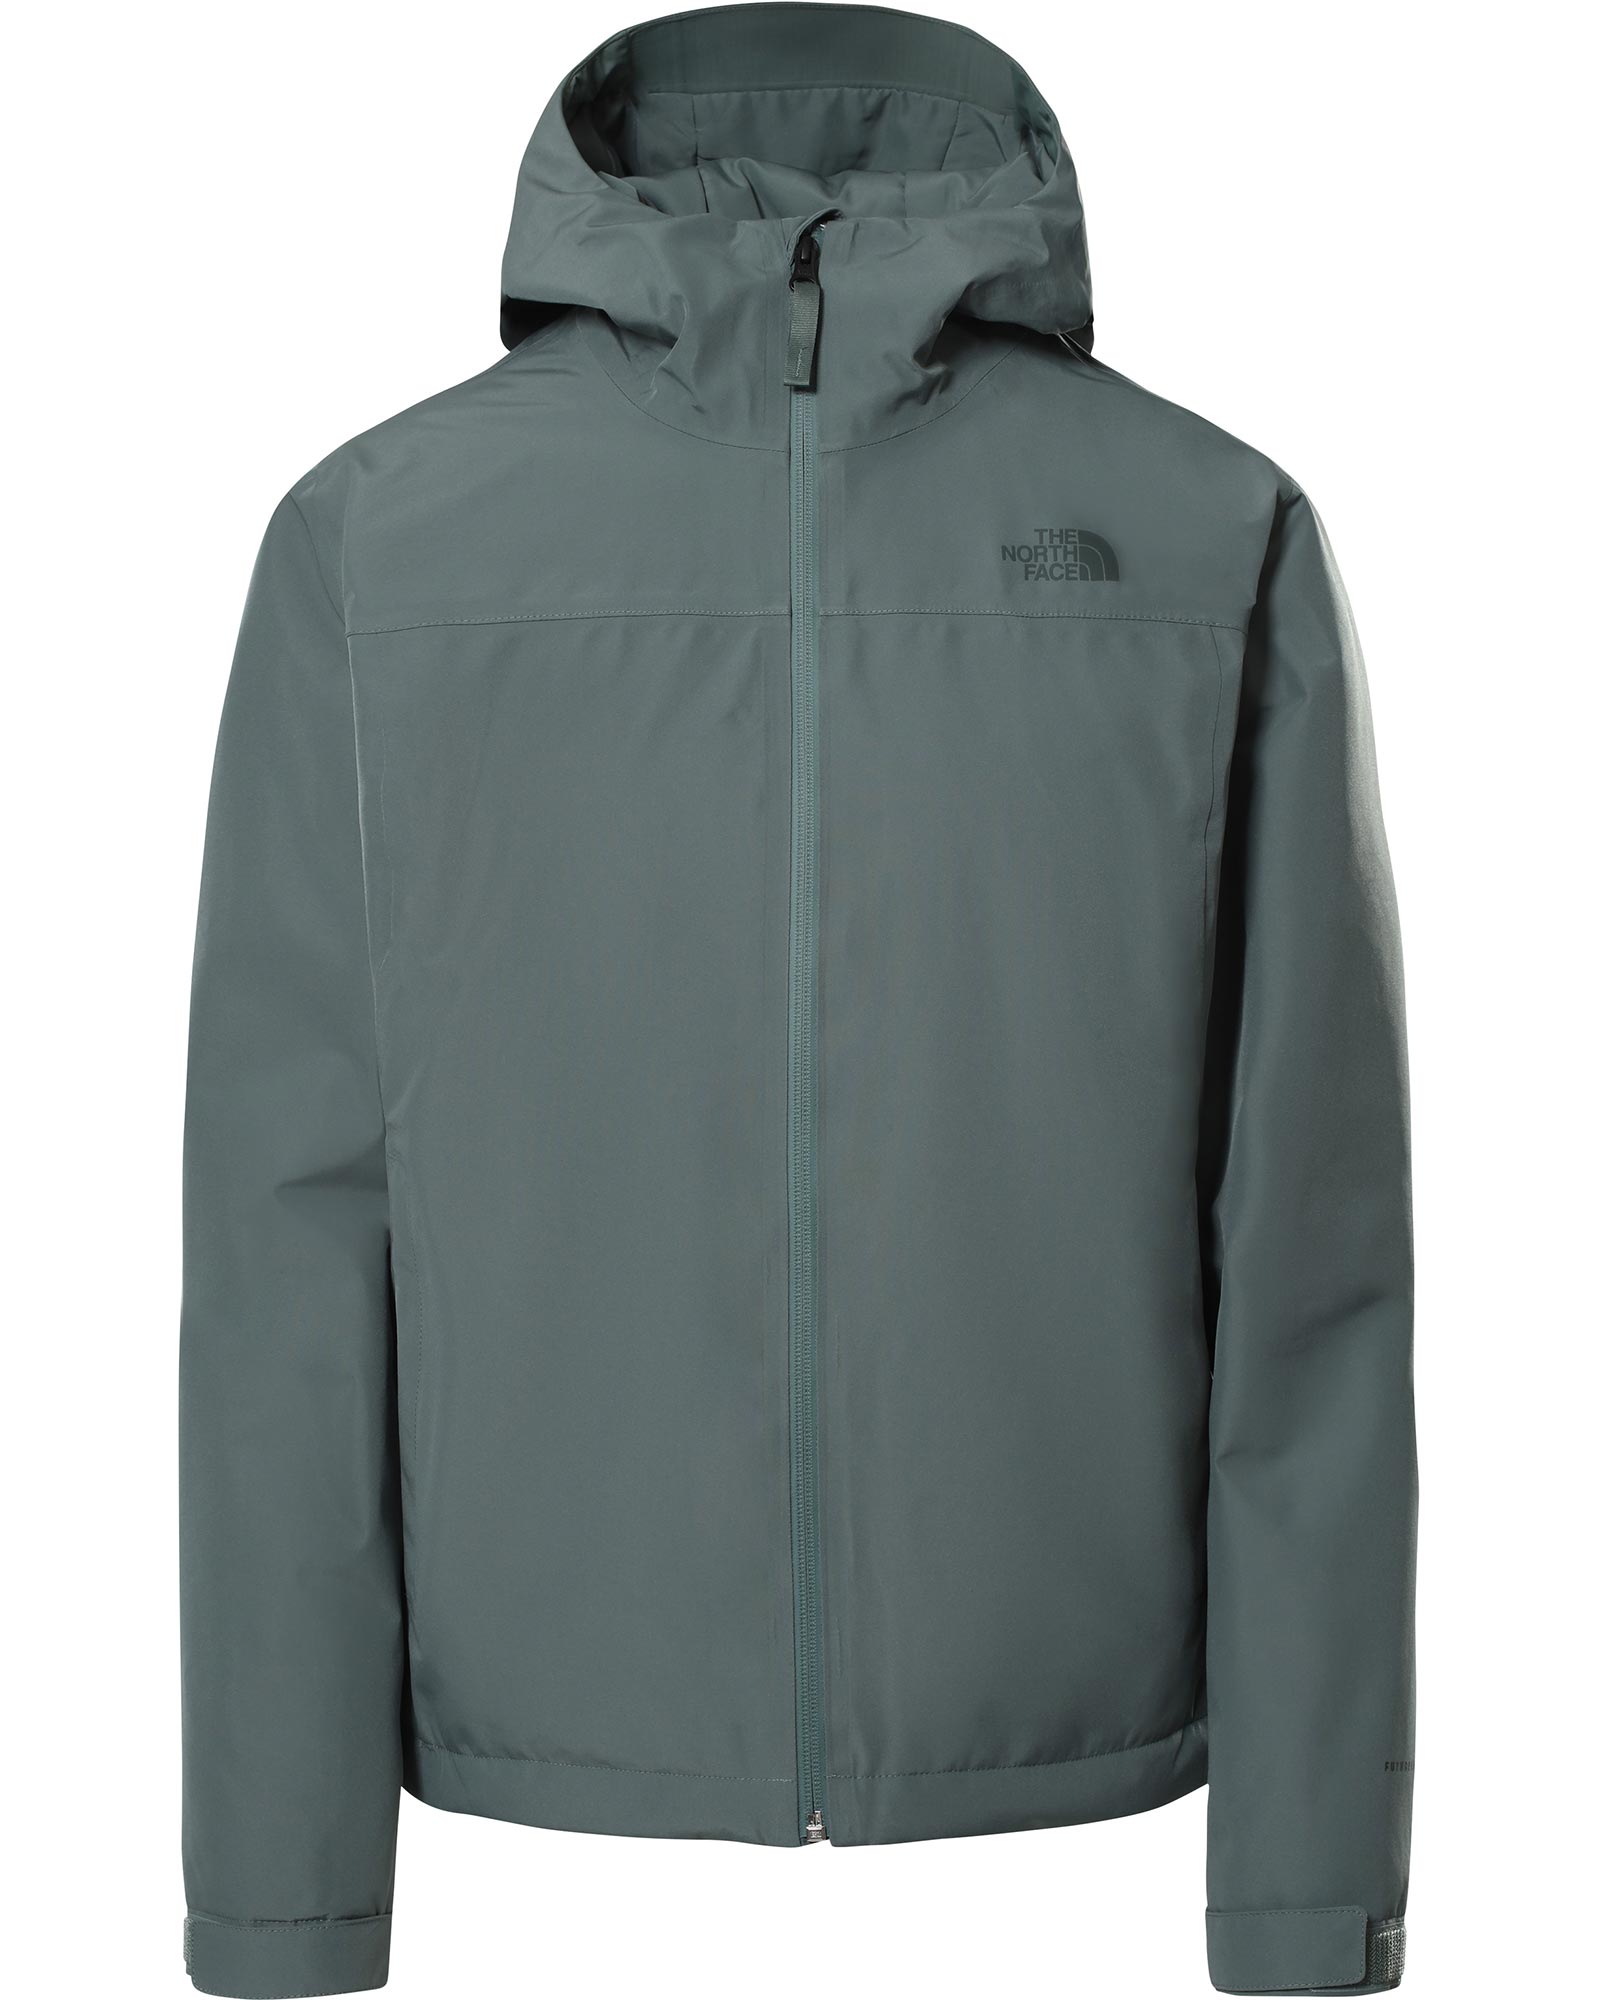 The North Face Dryzzle FUTURELIGHT Women’s Insulated Jacket - Balsam Green XS